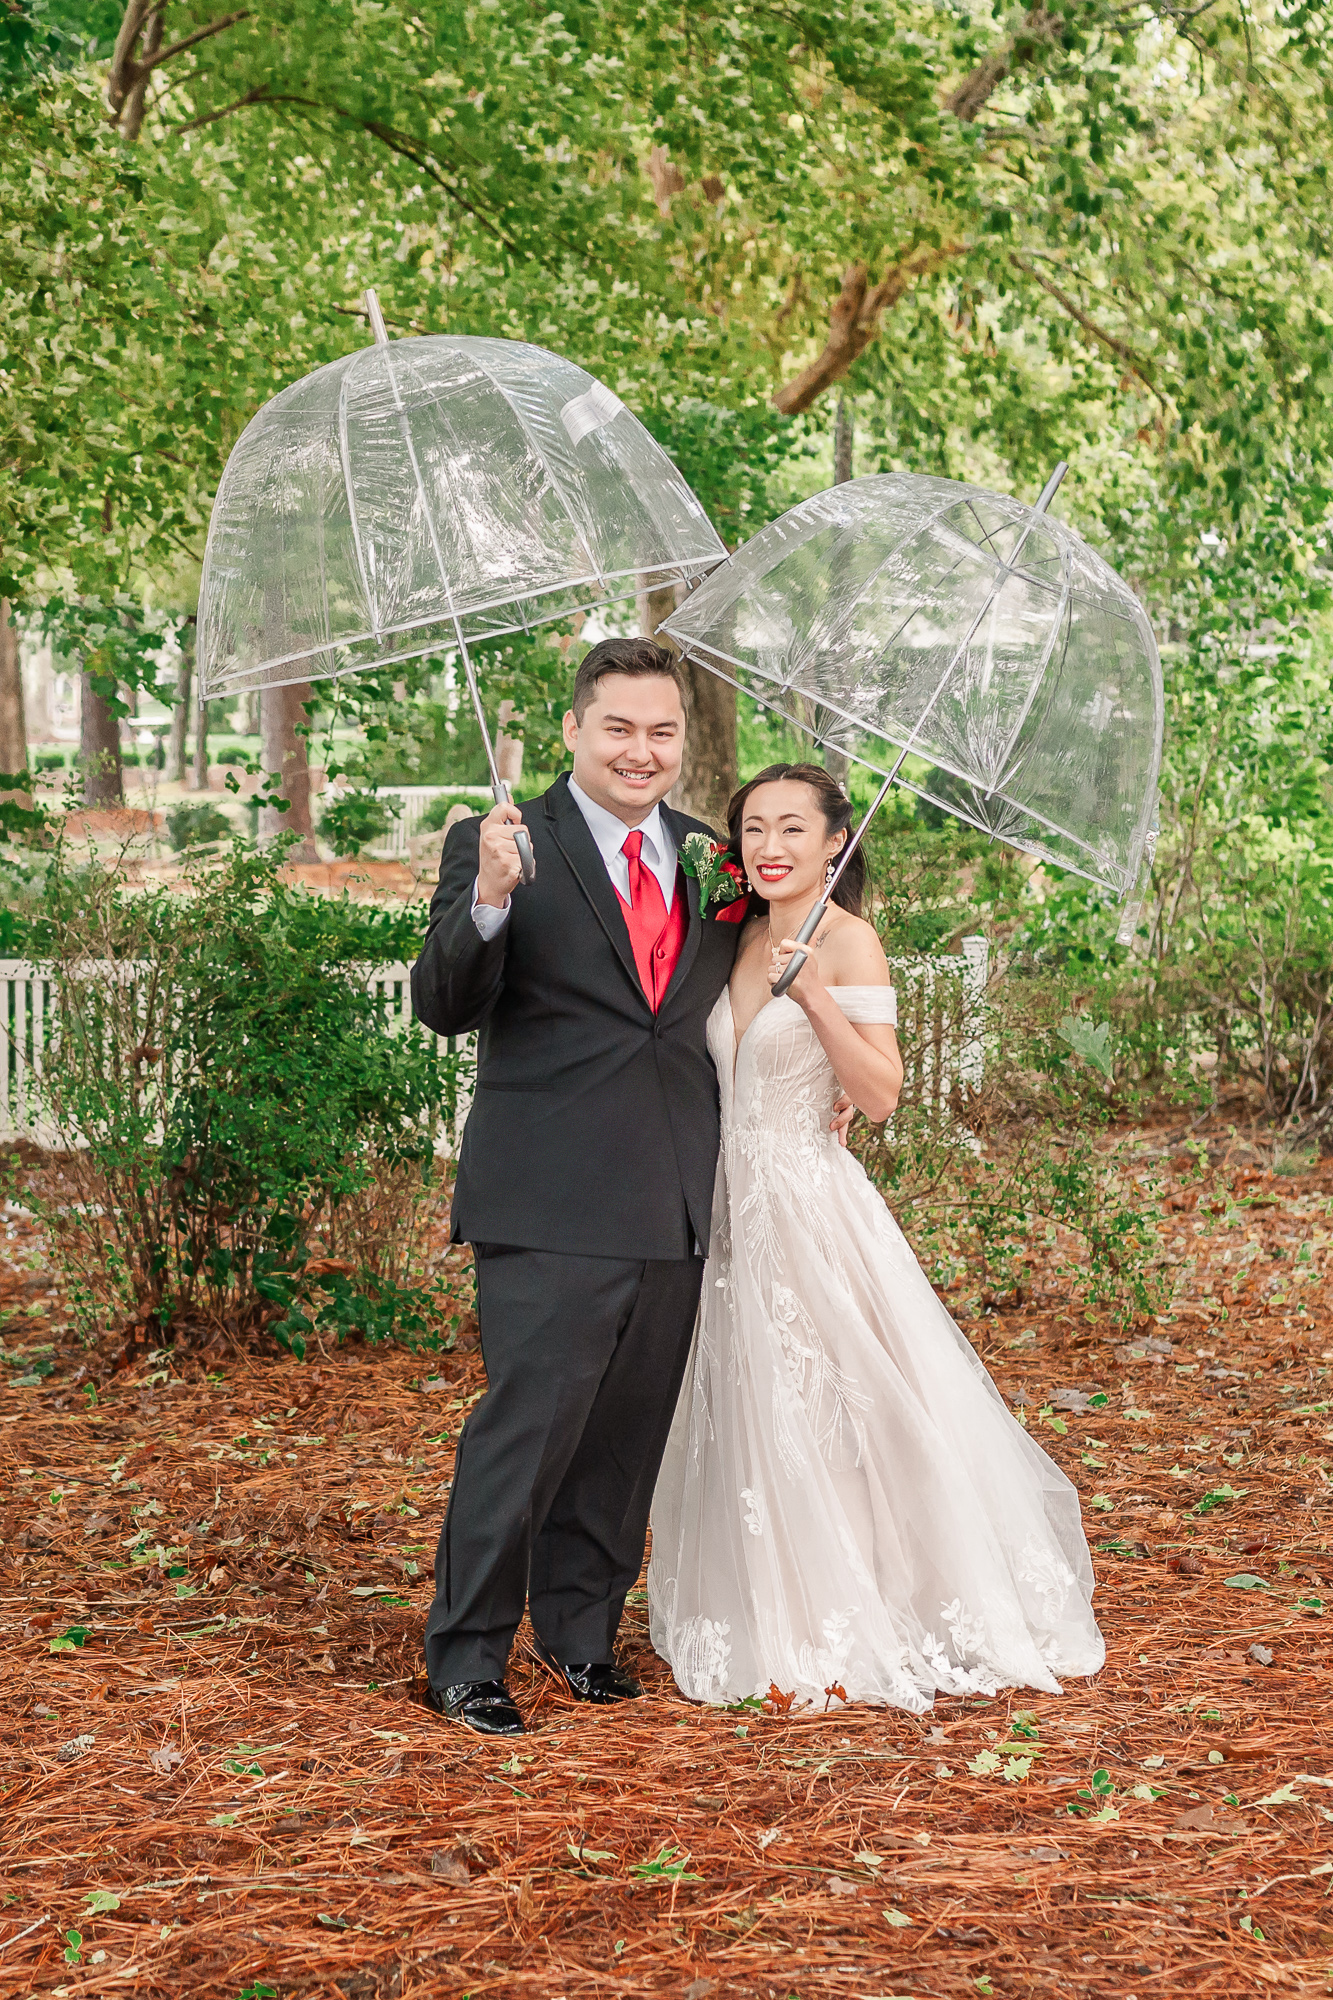 A happy couple outside during their fall Raleigh wedding after a rain storm by JoLynn Photography